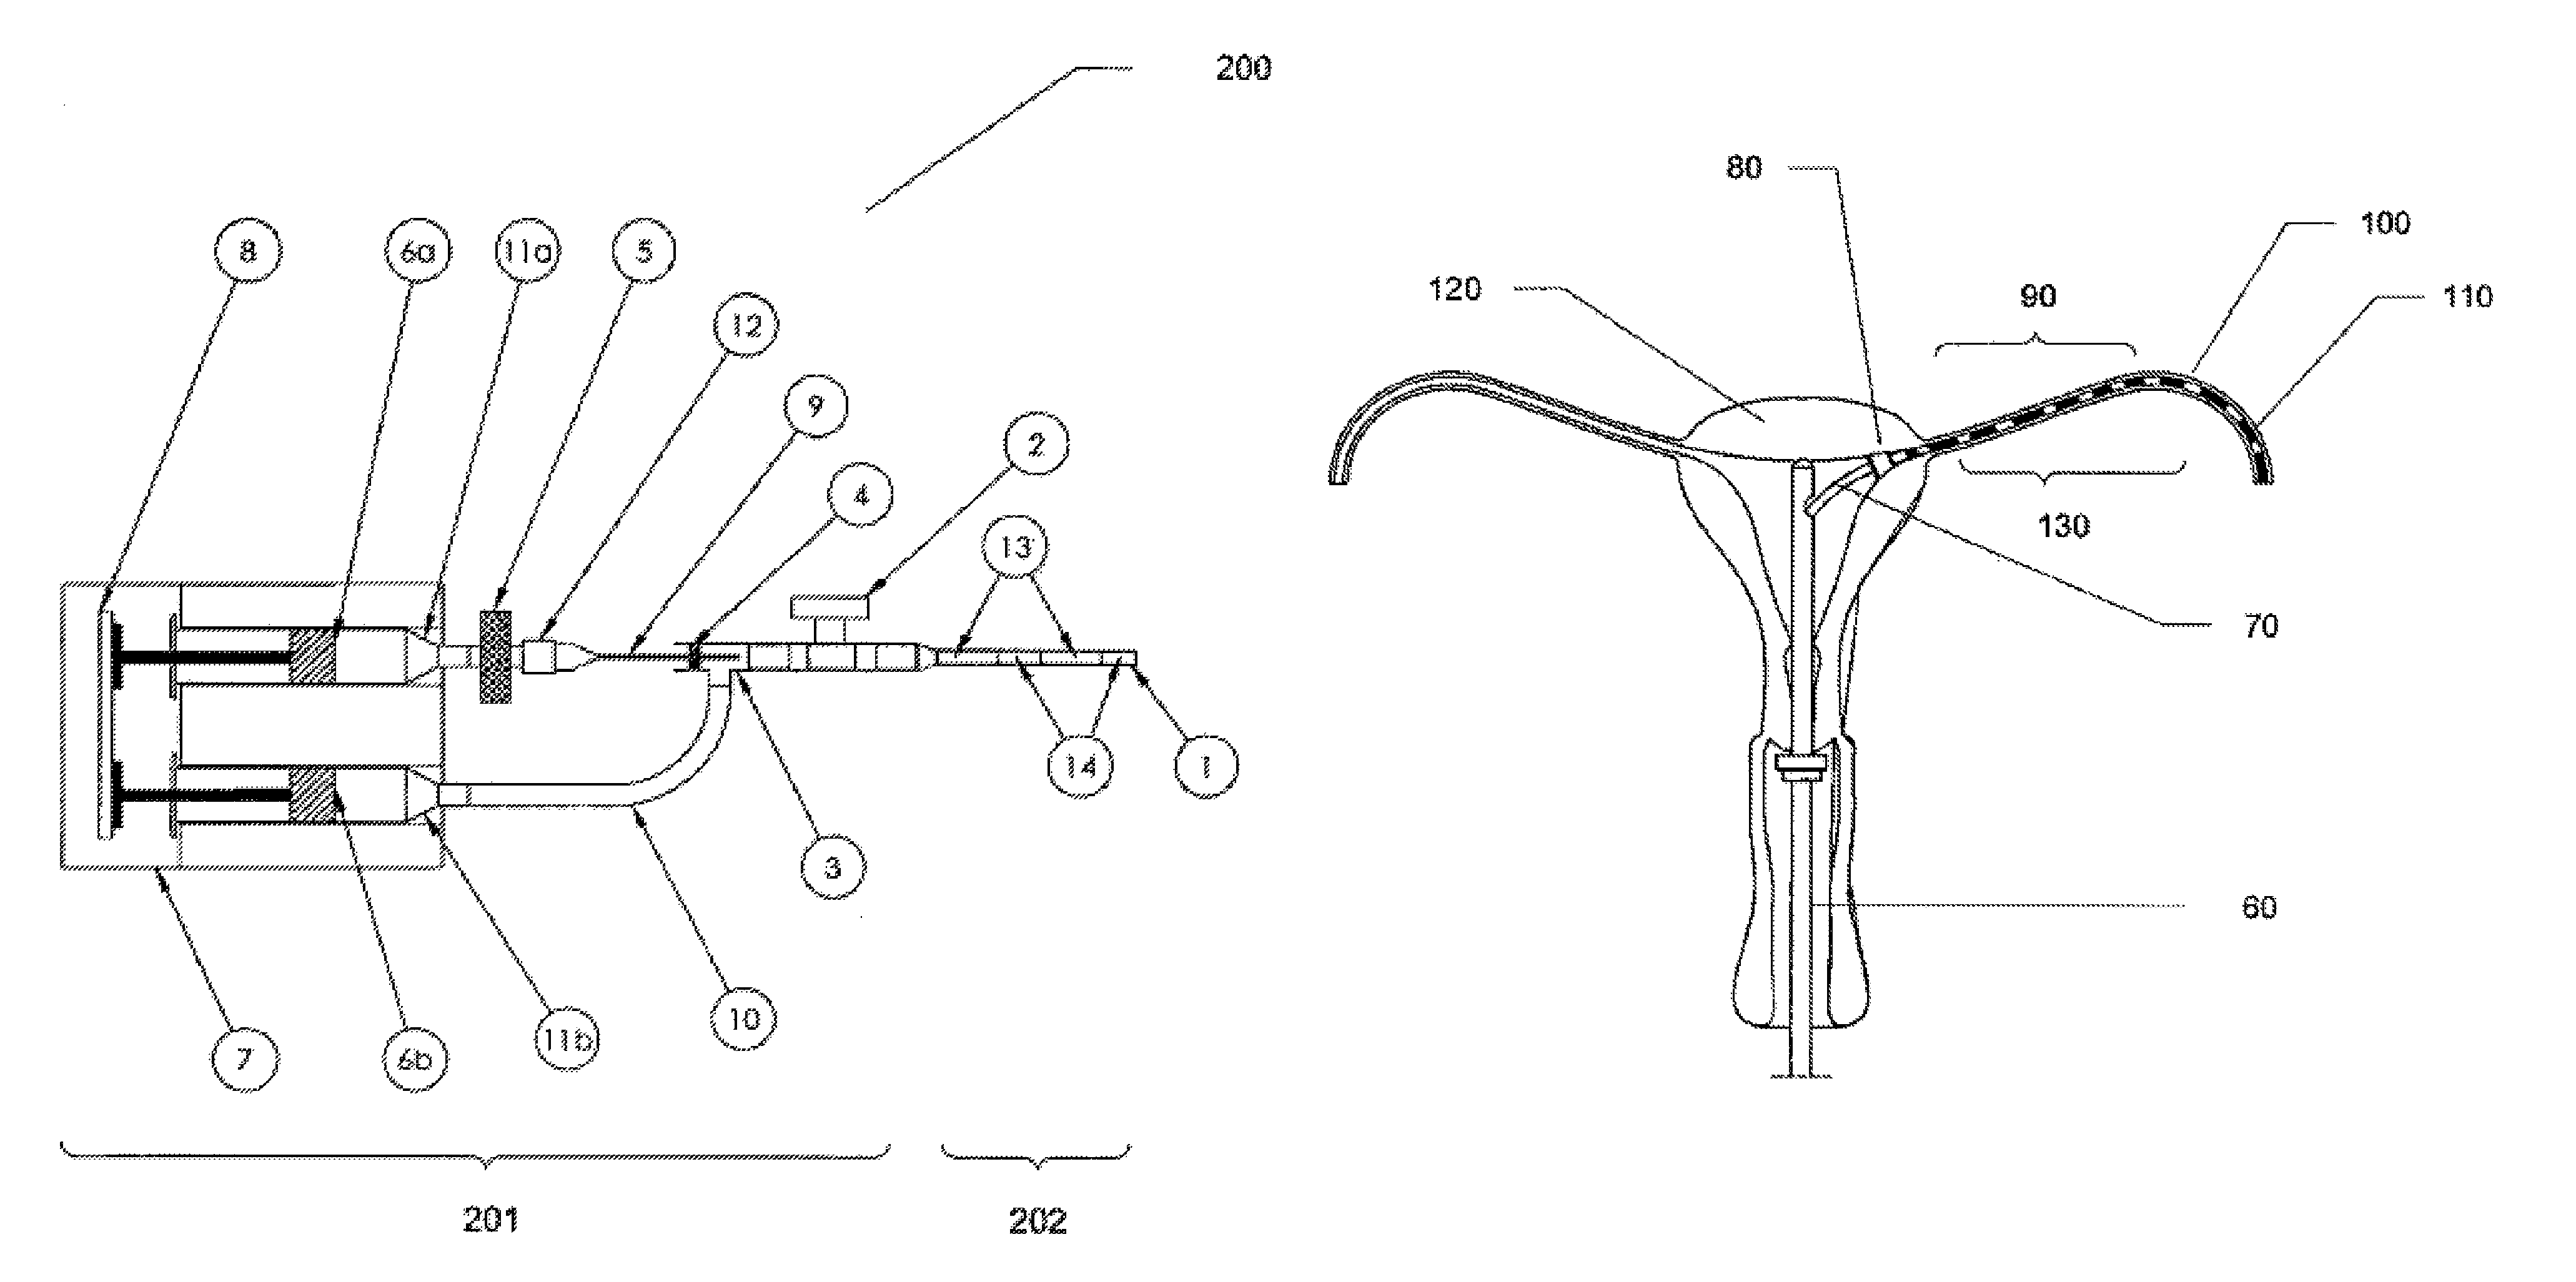 Contrast agent injection system for sonographic imaging